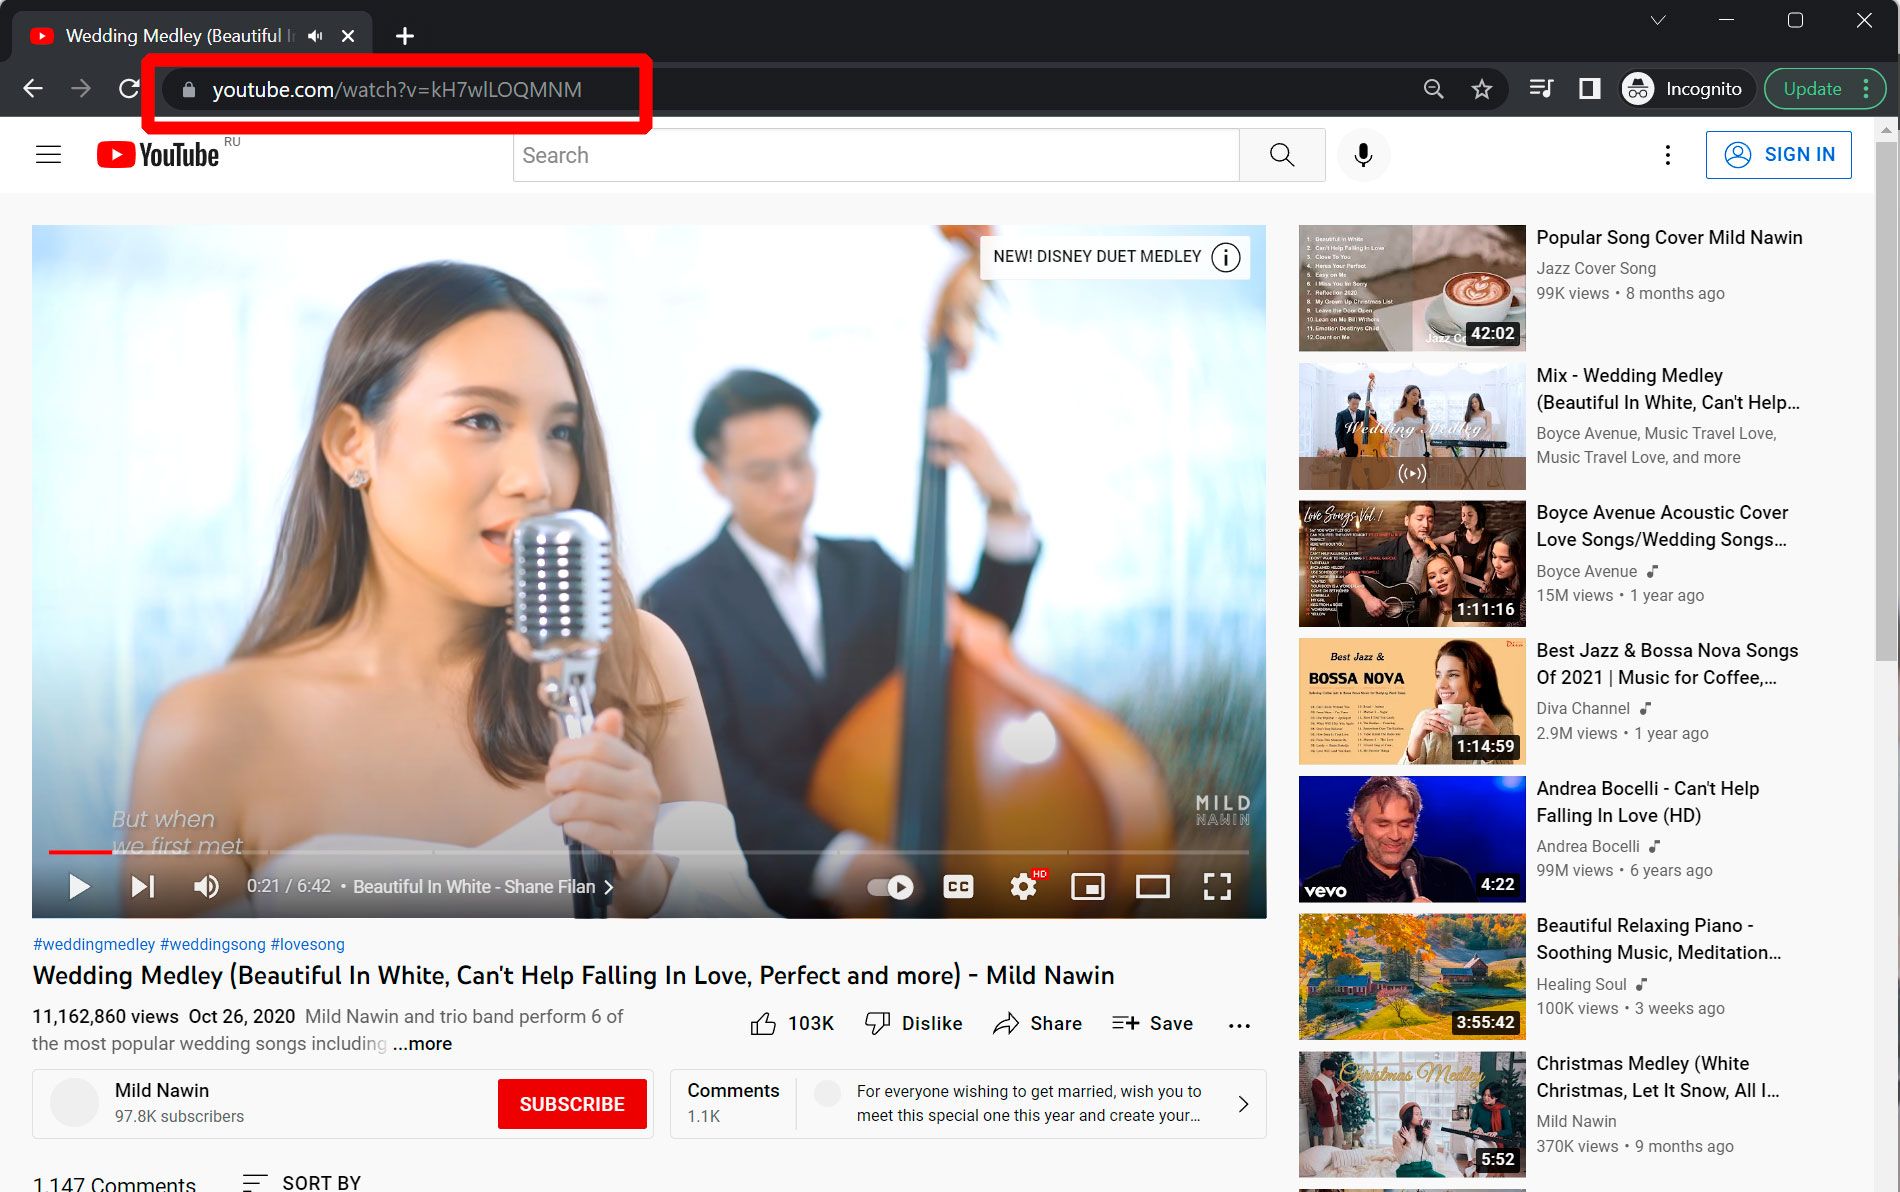 How to download YouTube Videos Step by Step - Step 1.